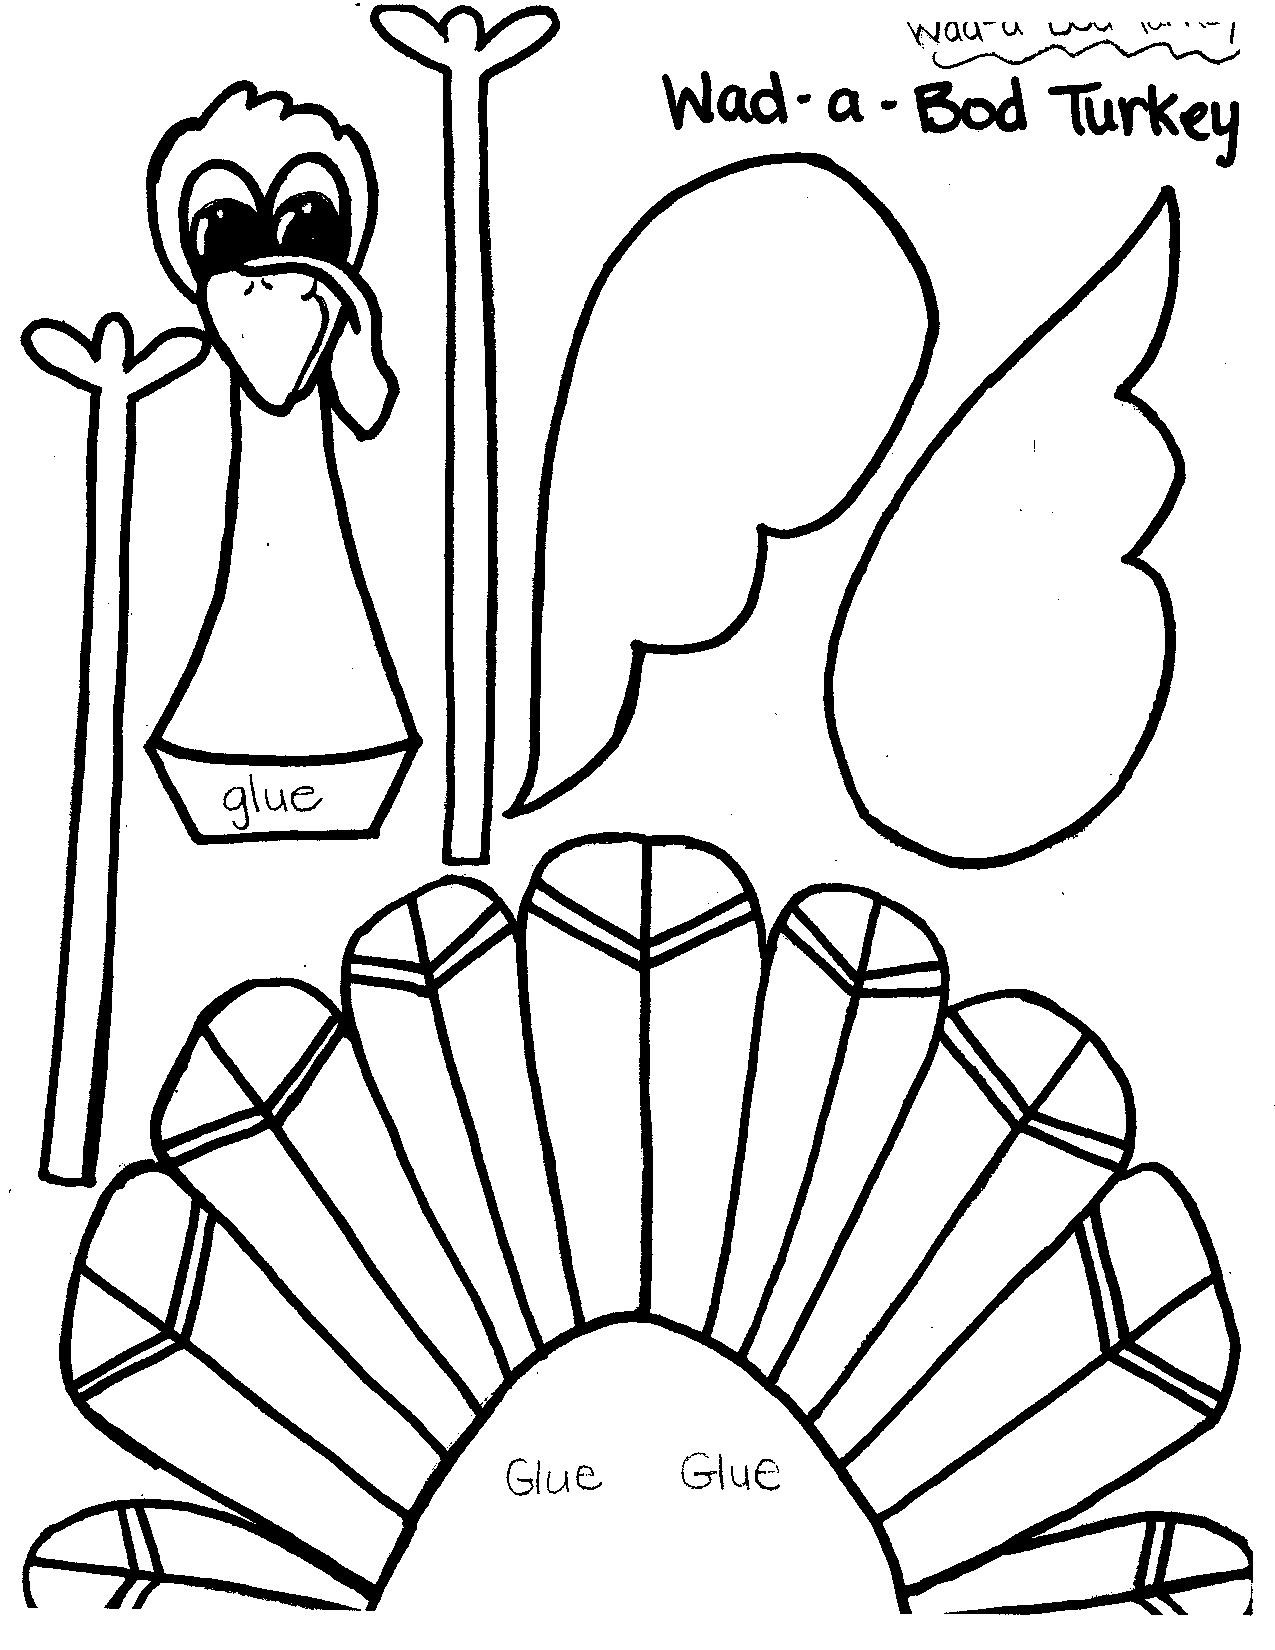 A Turkey For Thanksgiving Activities
 Printable Thanksgiving Crafts and Activities for Kids